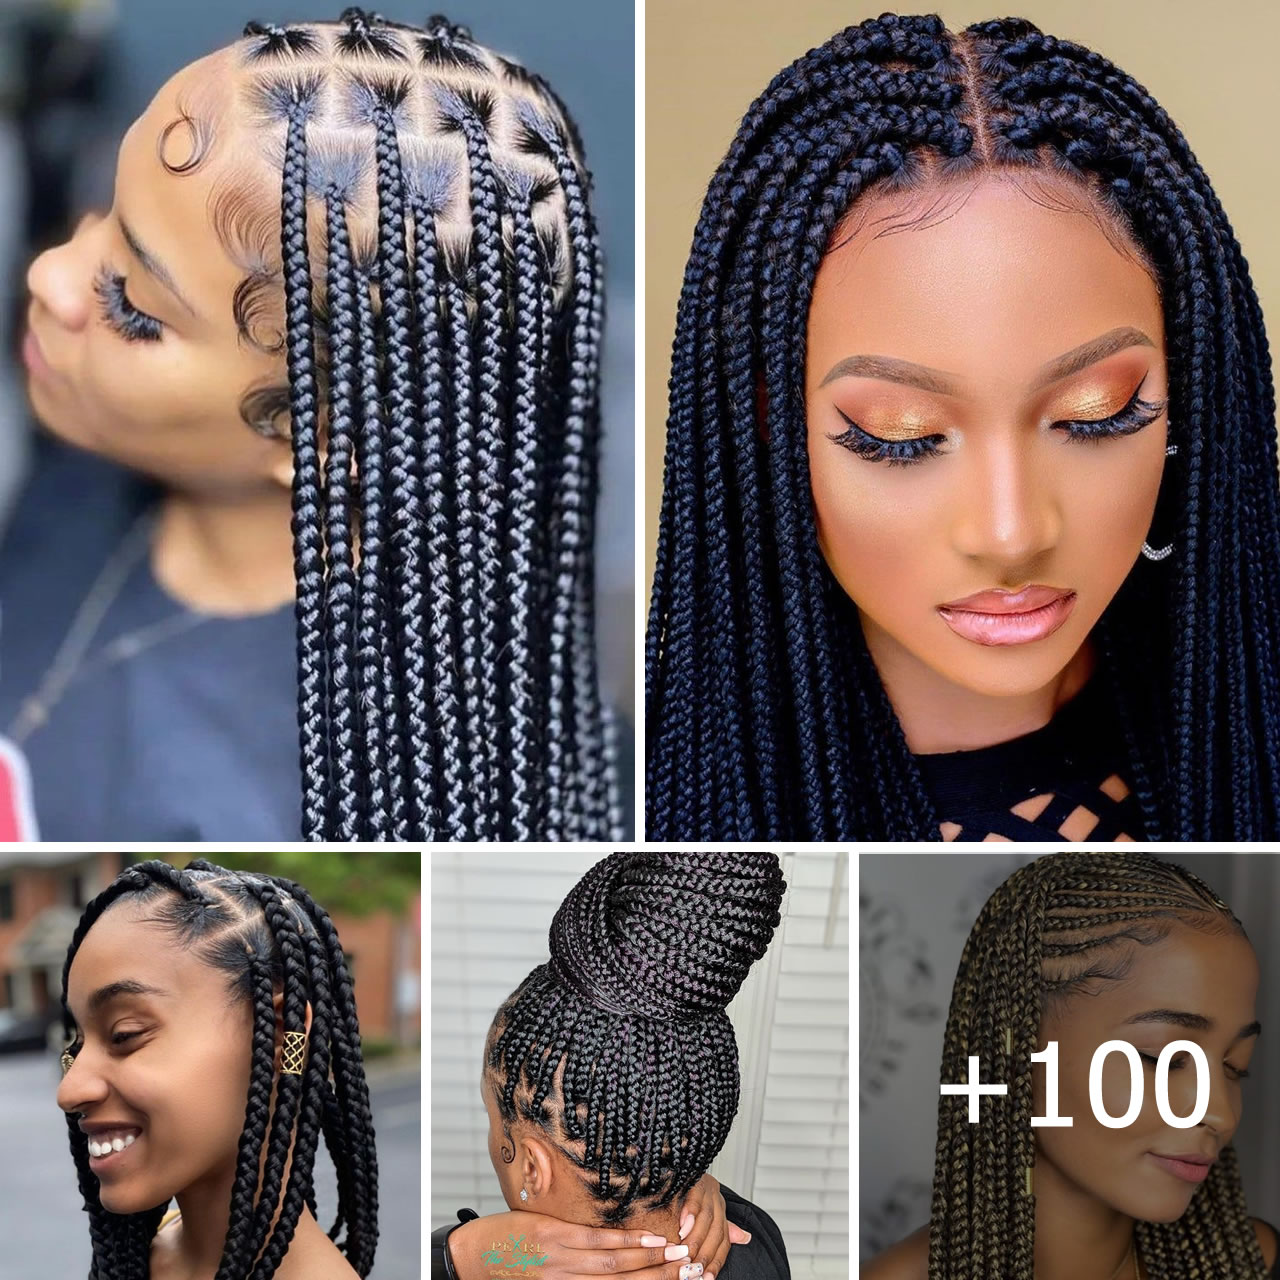 Top 103 Medium Box Braids Hairstyle To Try in 2023 1